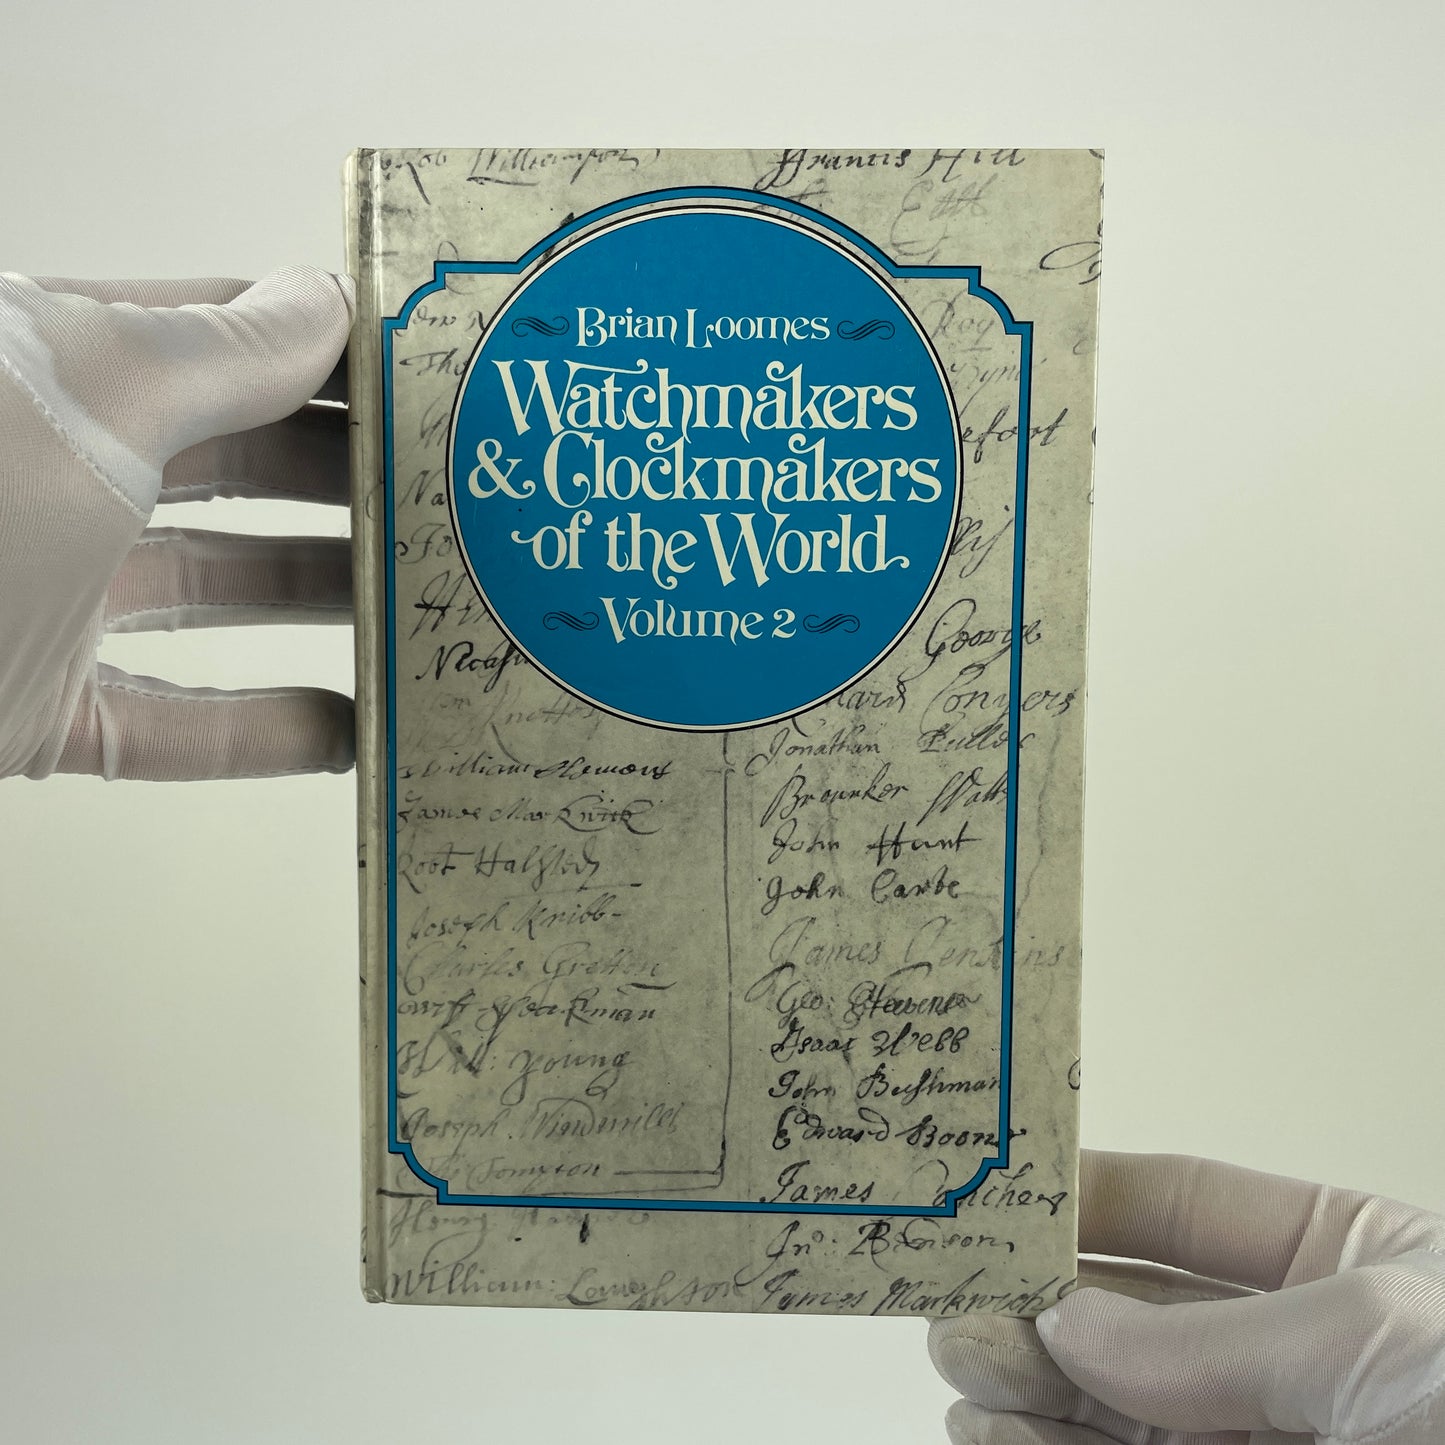 Nov Lot 82- Watchmakers and Clockmakers of the World Book